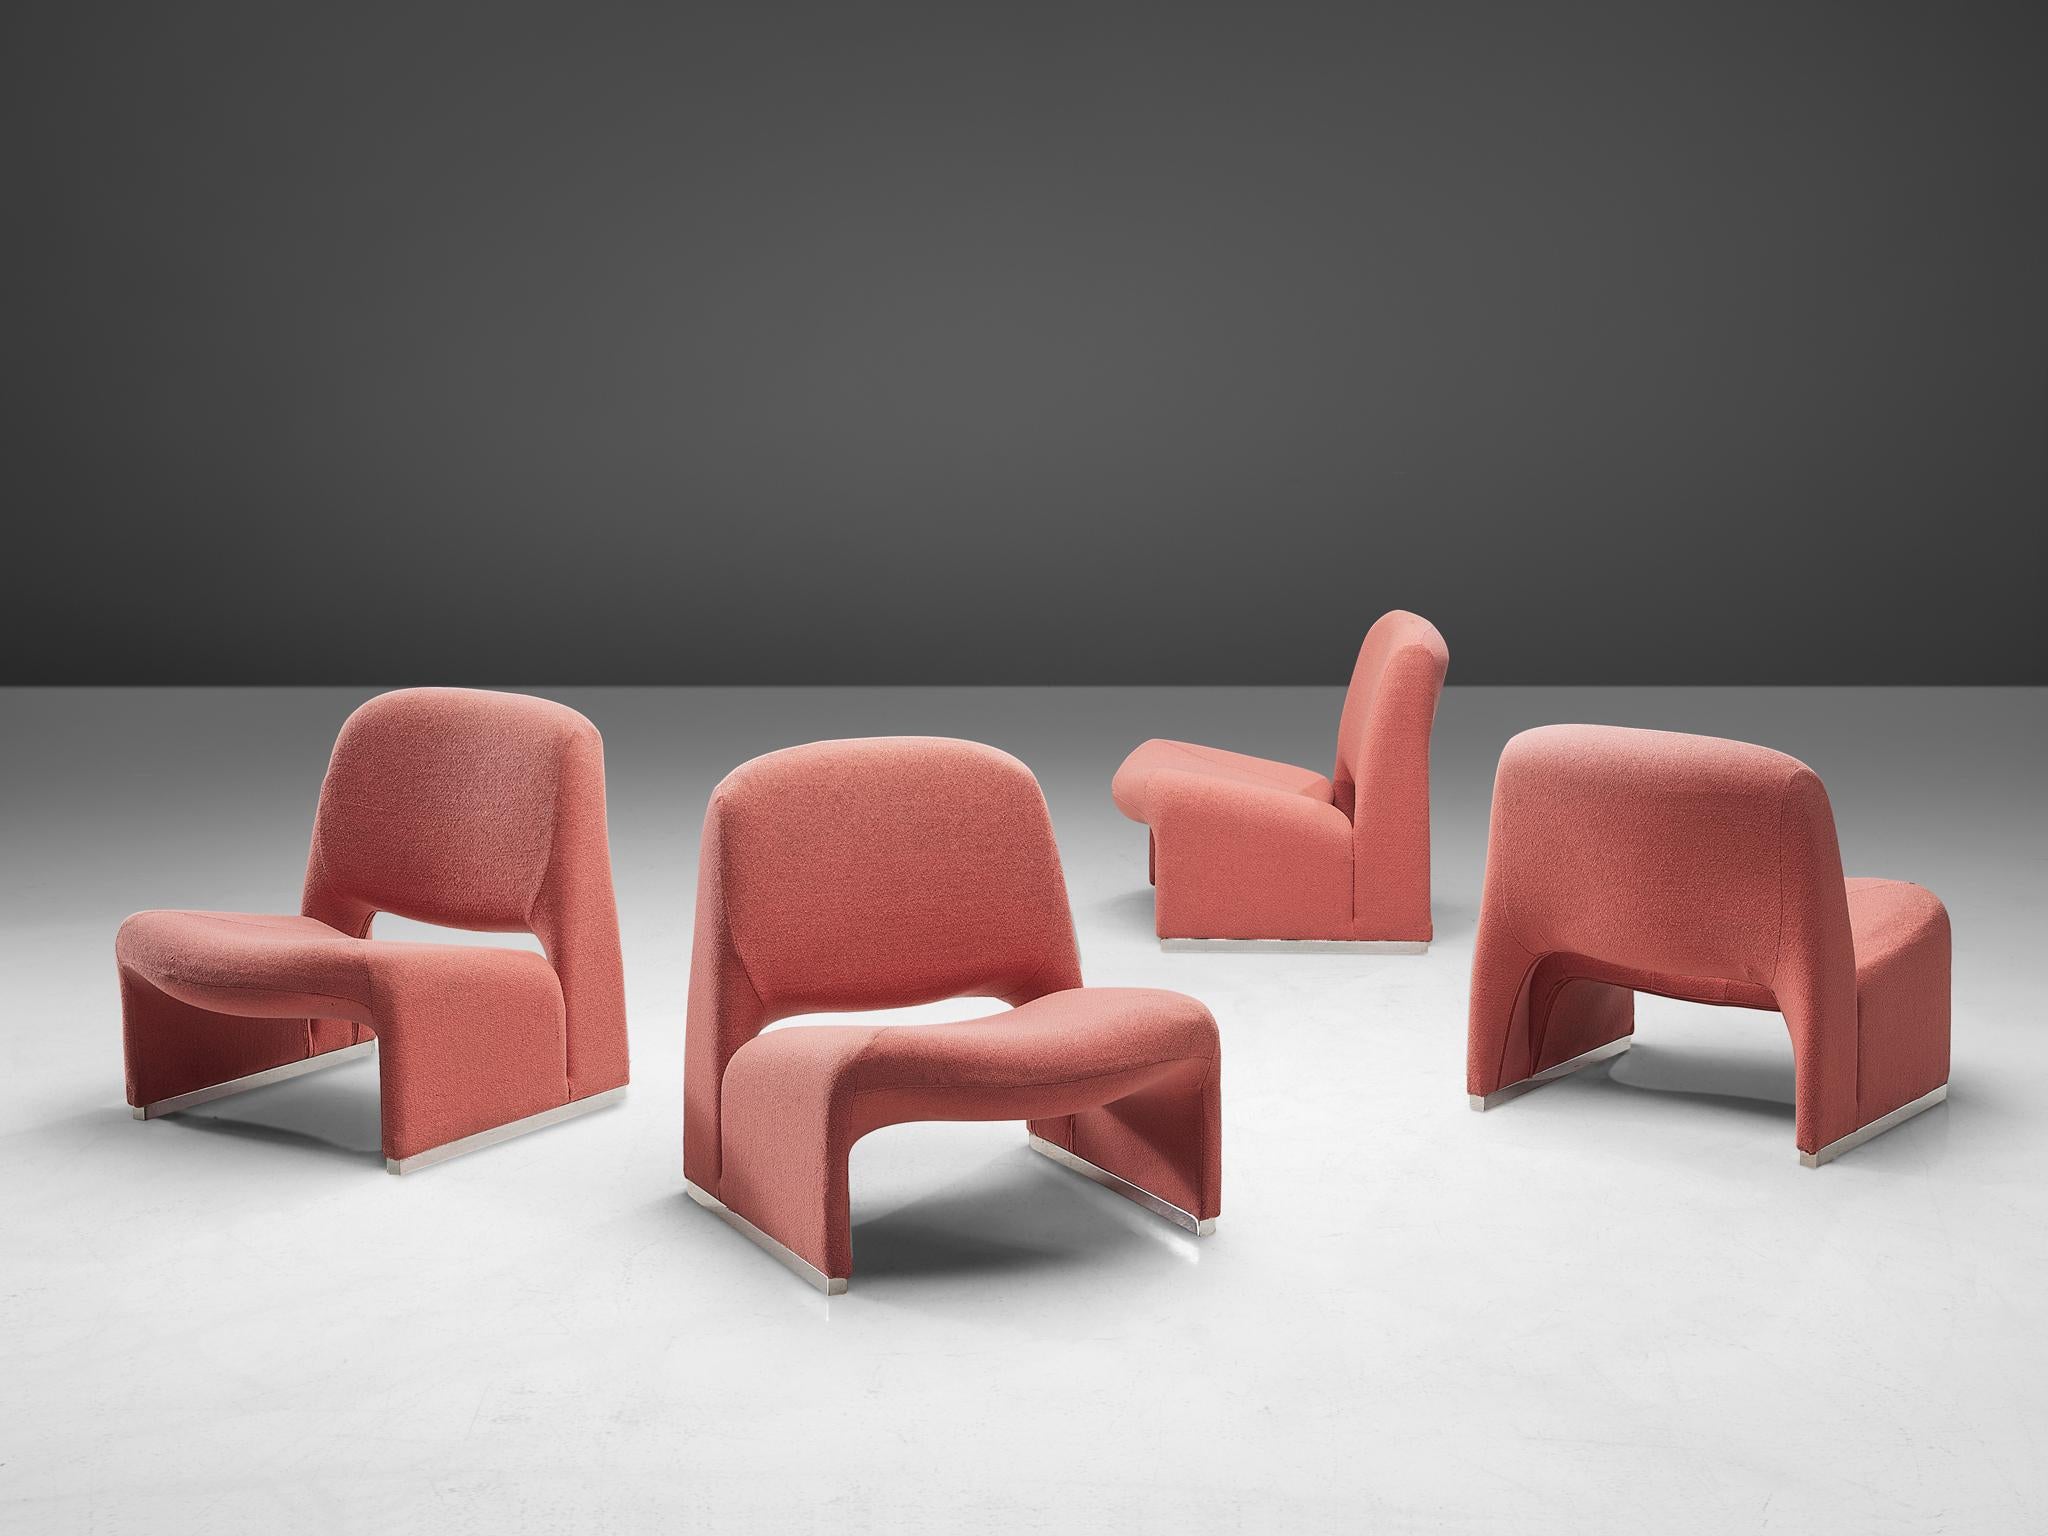 Giancarlo Piretti for Artifort, 'Arki' lounge chairs, Italy, 1970s

The 'Alky' armchair designed by Giancarlo Piretti for Castelli in 1969. Later, Artifort took over the production of these chairs. The model has bulky and fluid shapes. It consists